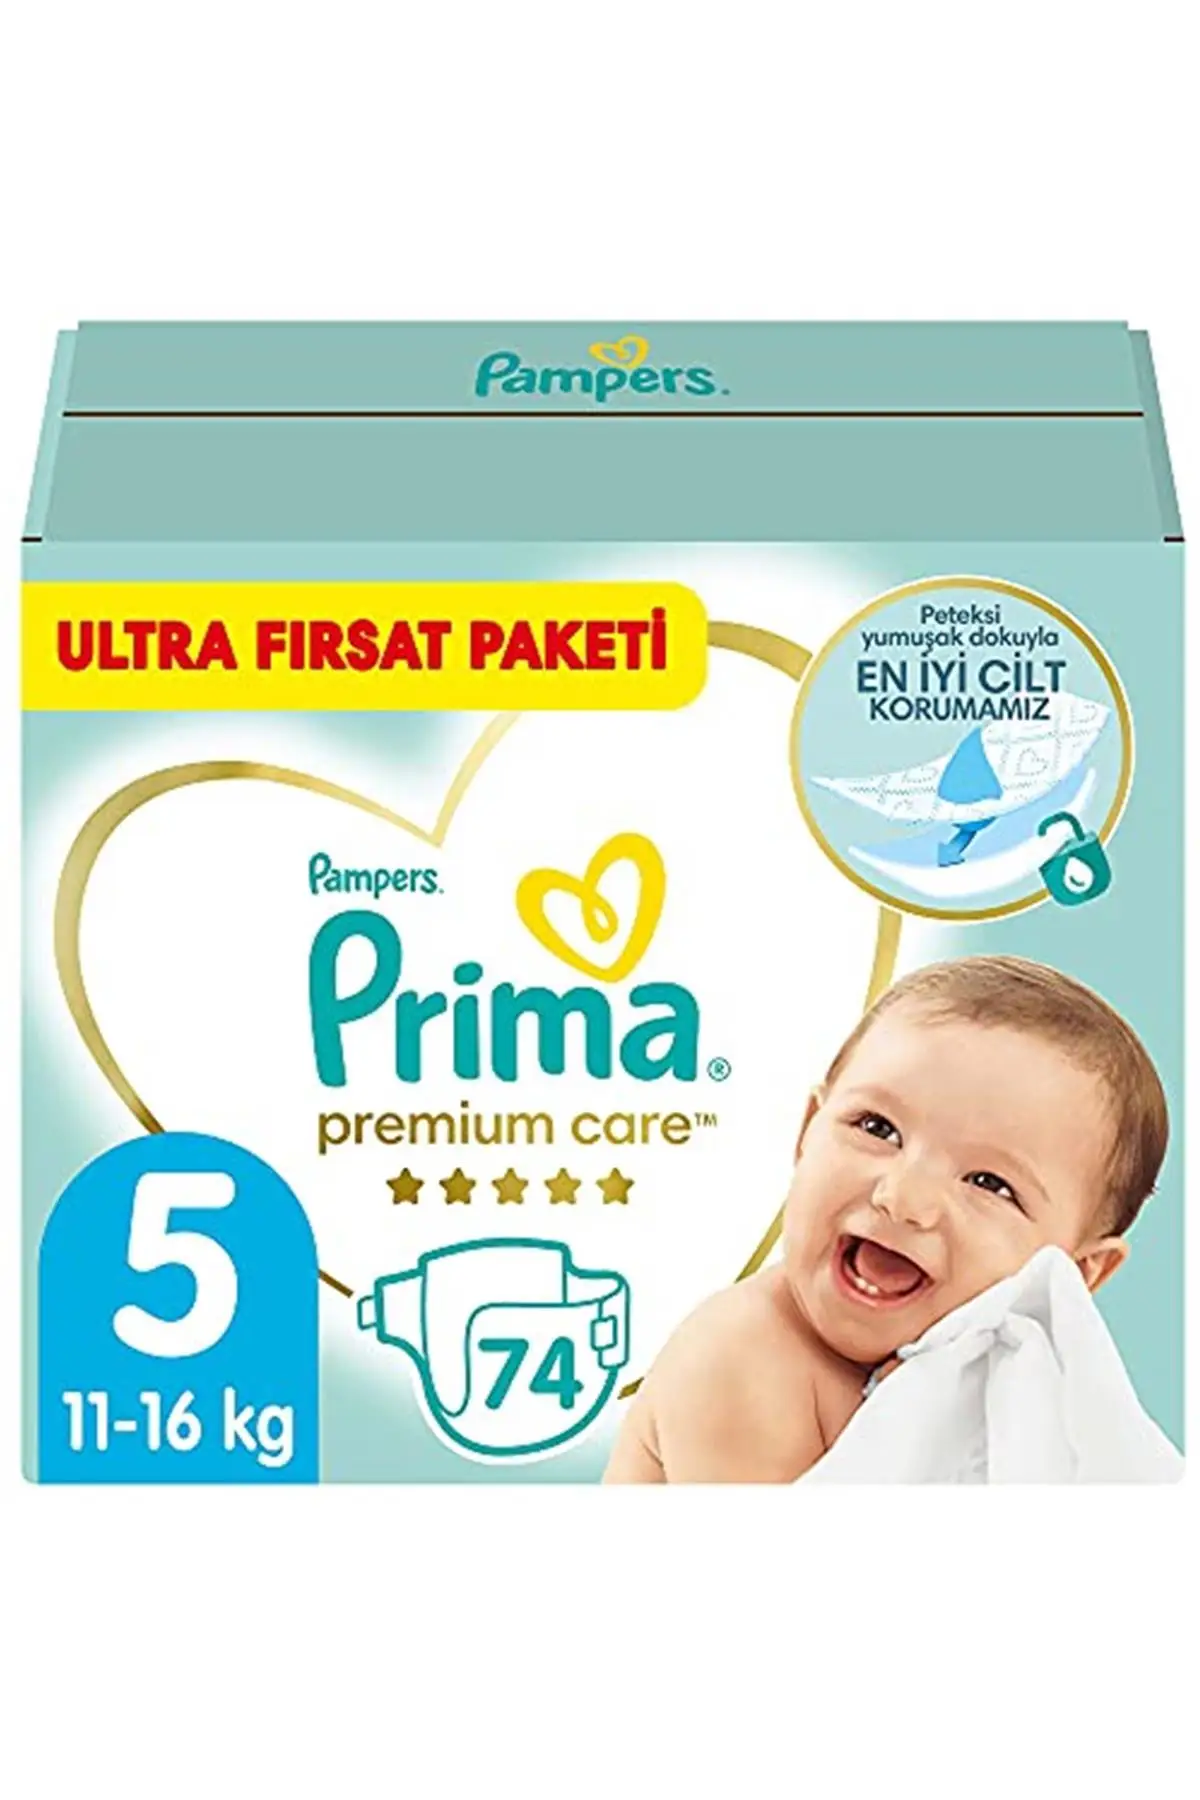 

Brand: Prima Baby Diaper Premium Care 5 Size 74 Pcs Junior Occasion Pack Category: Baby Diapers